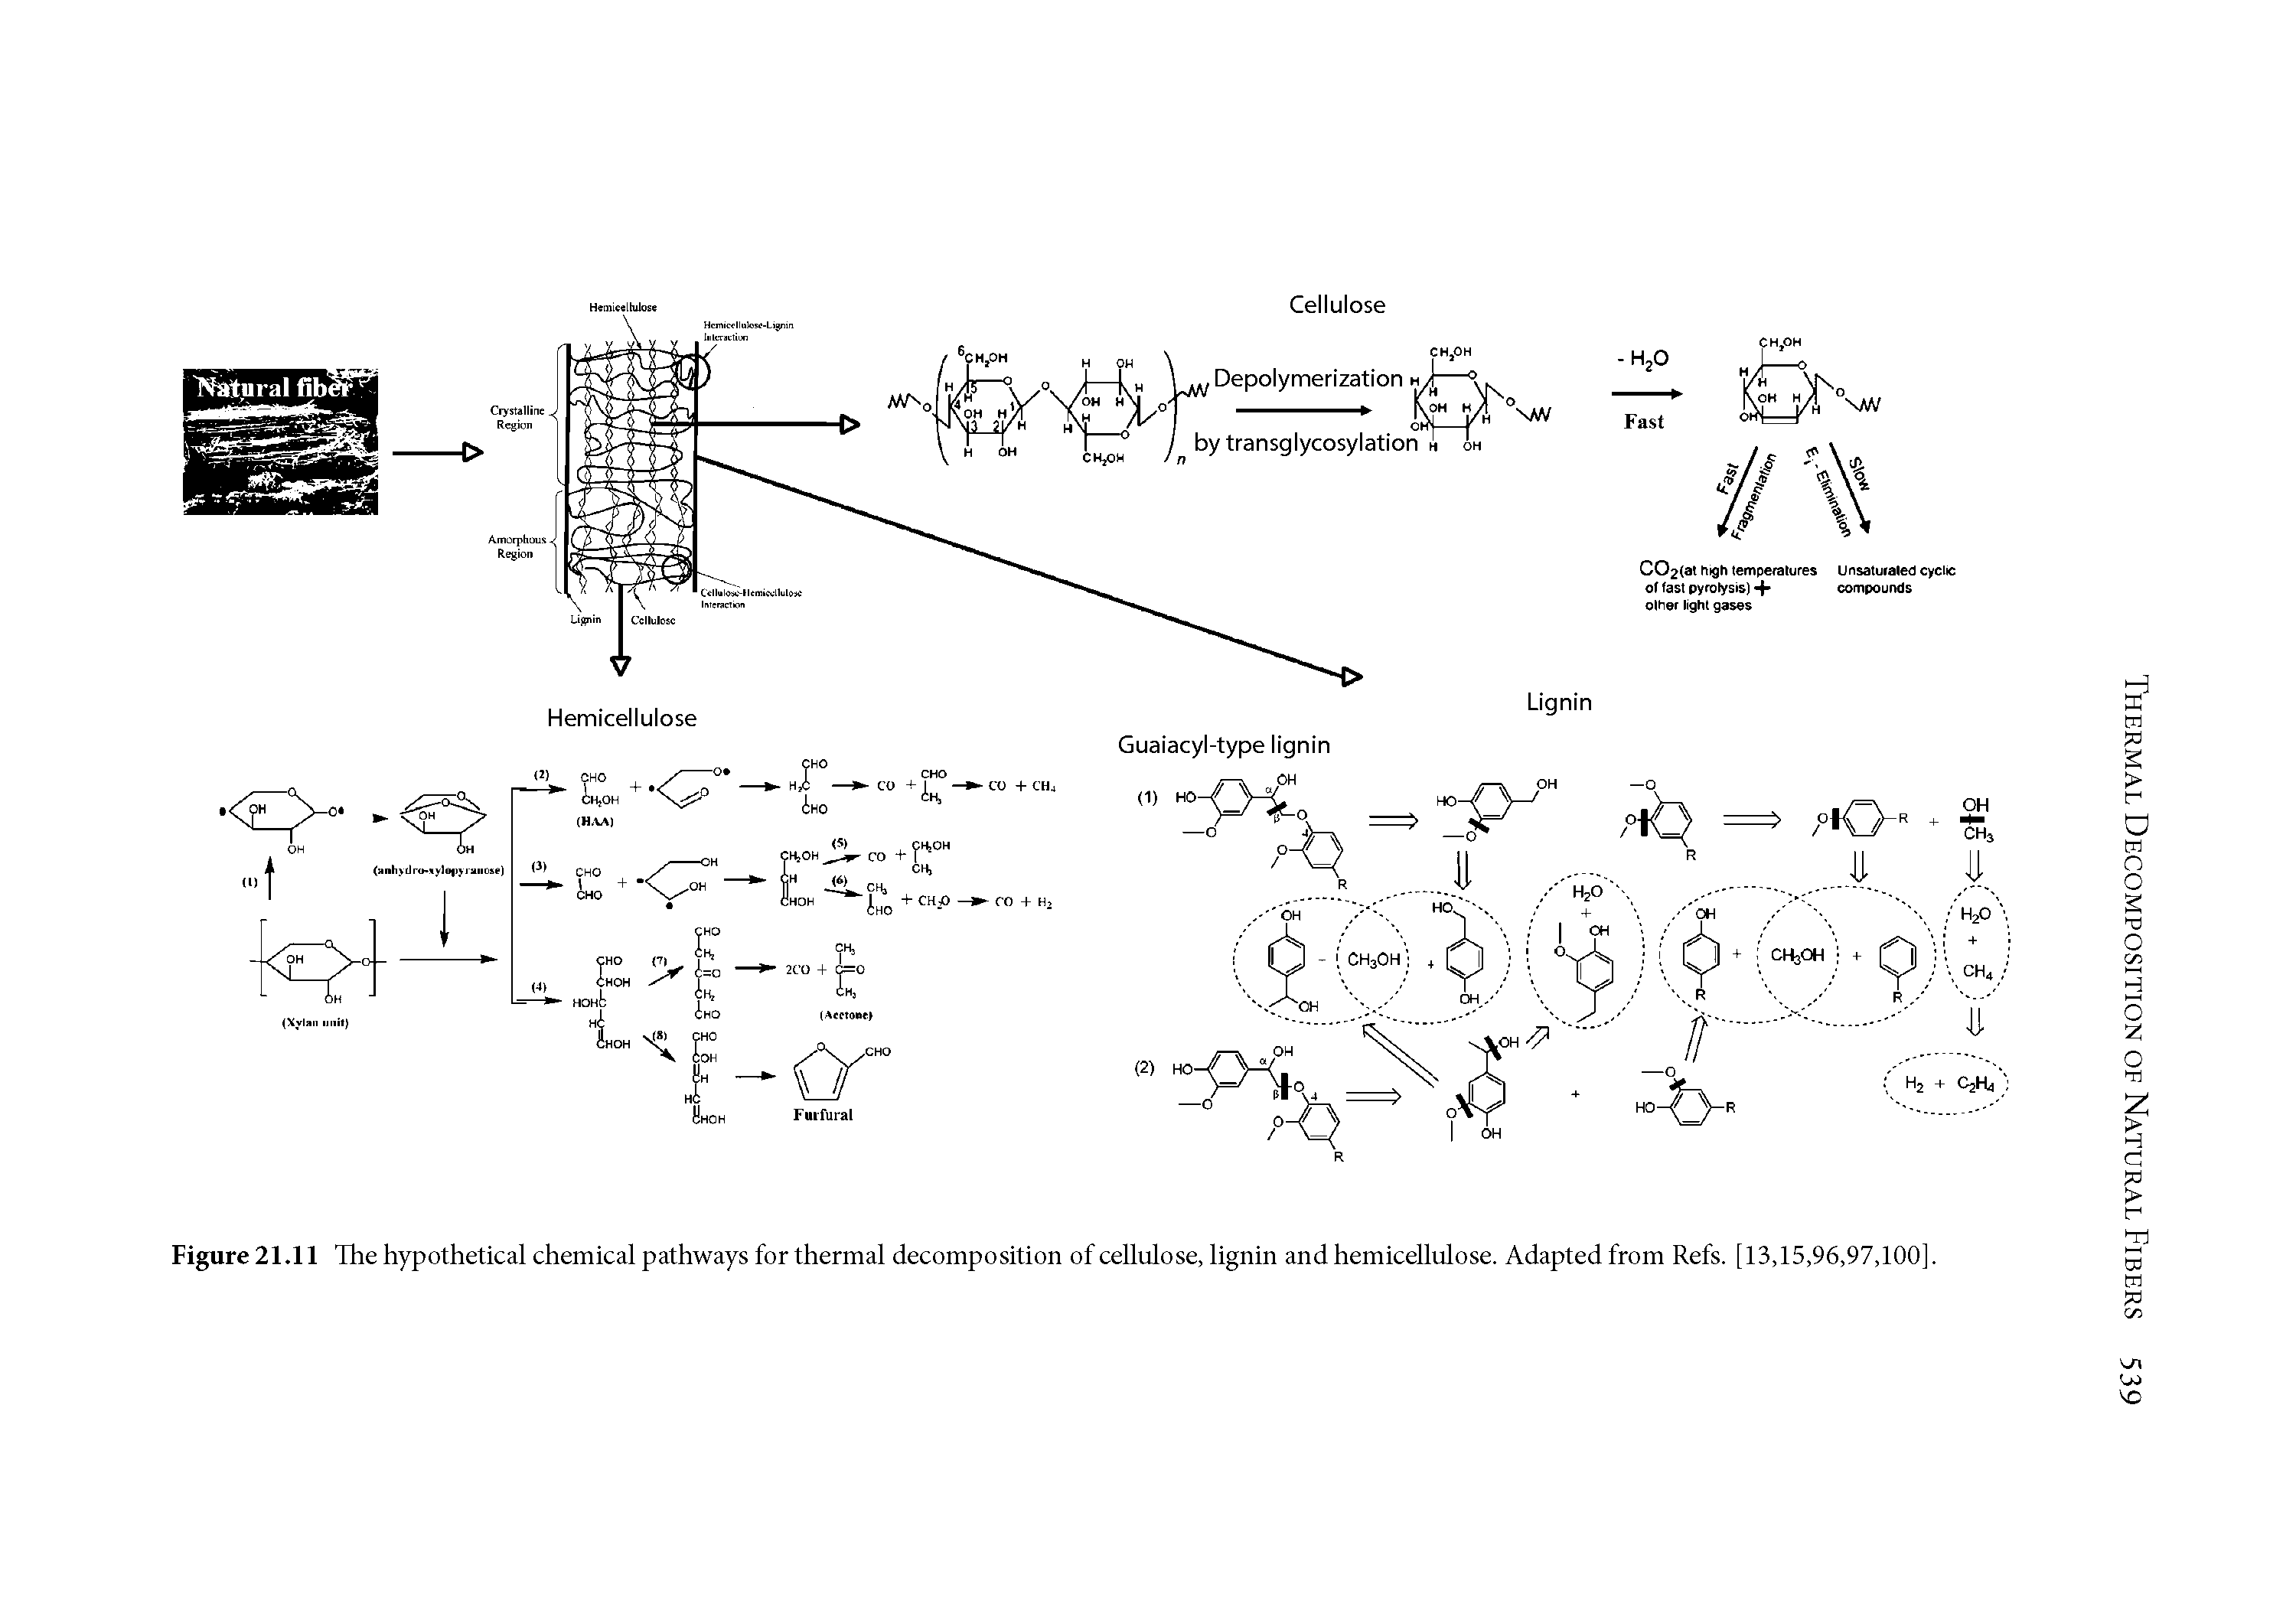 Figure 21.11 The hypothetical chemical pathways for thermal decomposition of cellulose, lignin and hemicellulose. Adapted from Refs. [13,15,96,97,100].